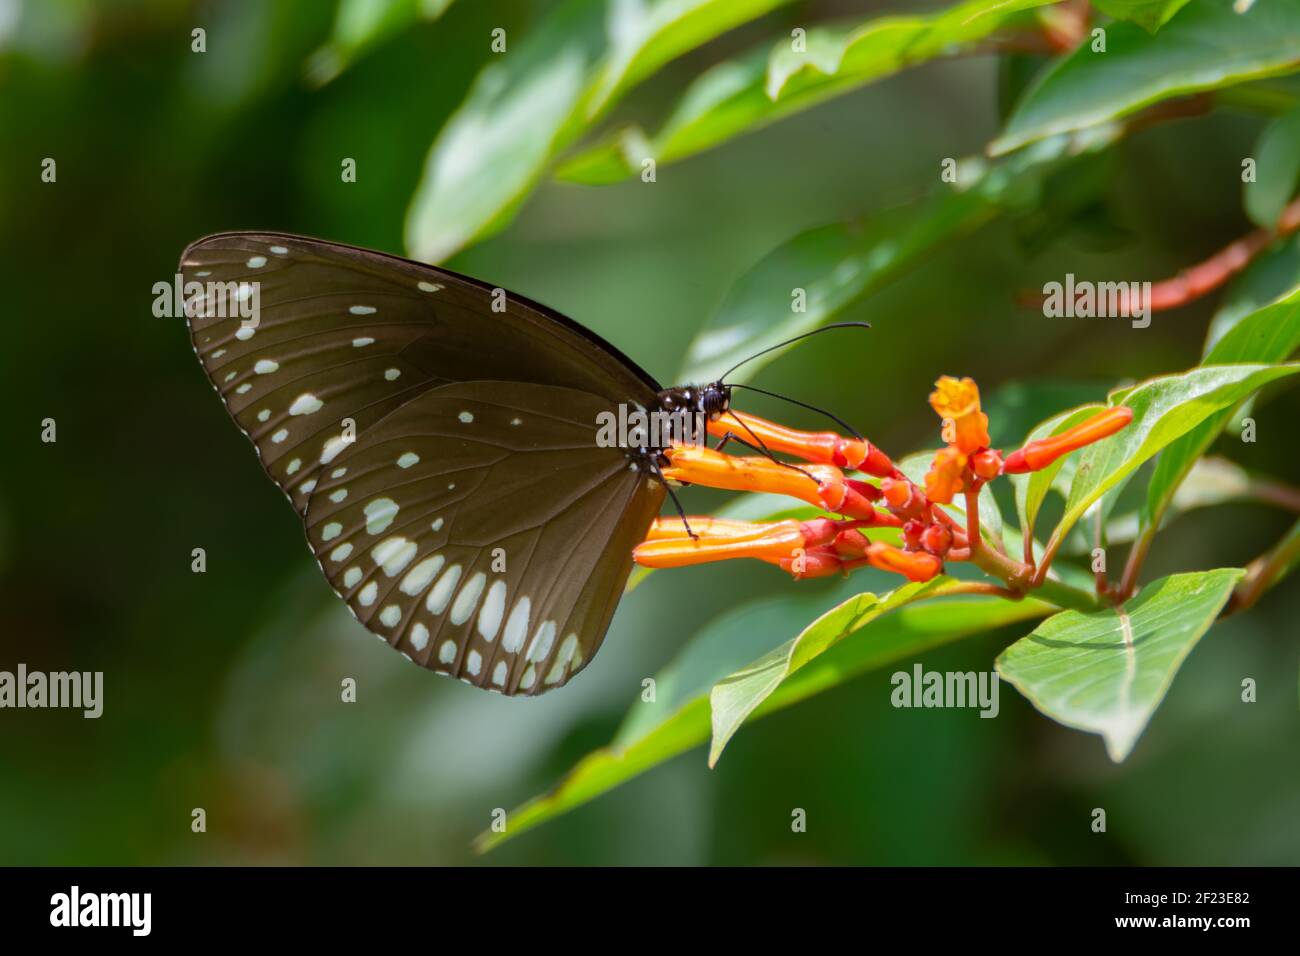 A close-up shot of a beautiful Common crow butterfly (Euploea core), feeding on Firebush flowers in the garden. Stock Photo